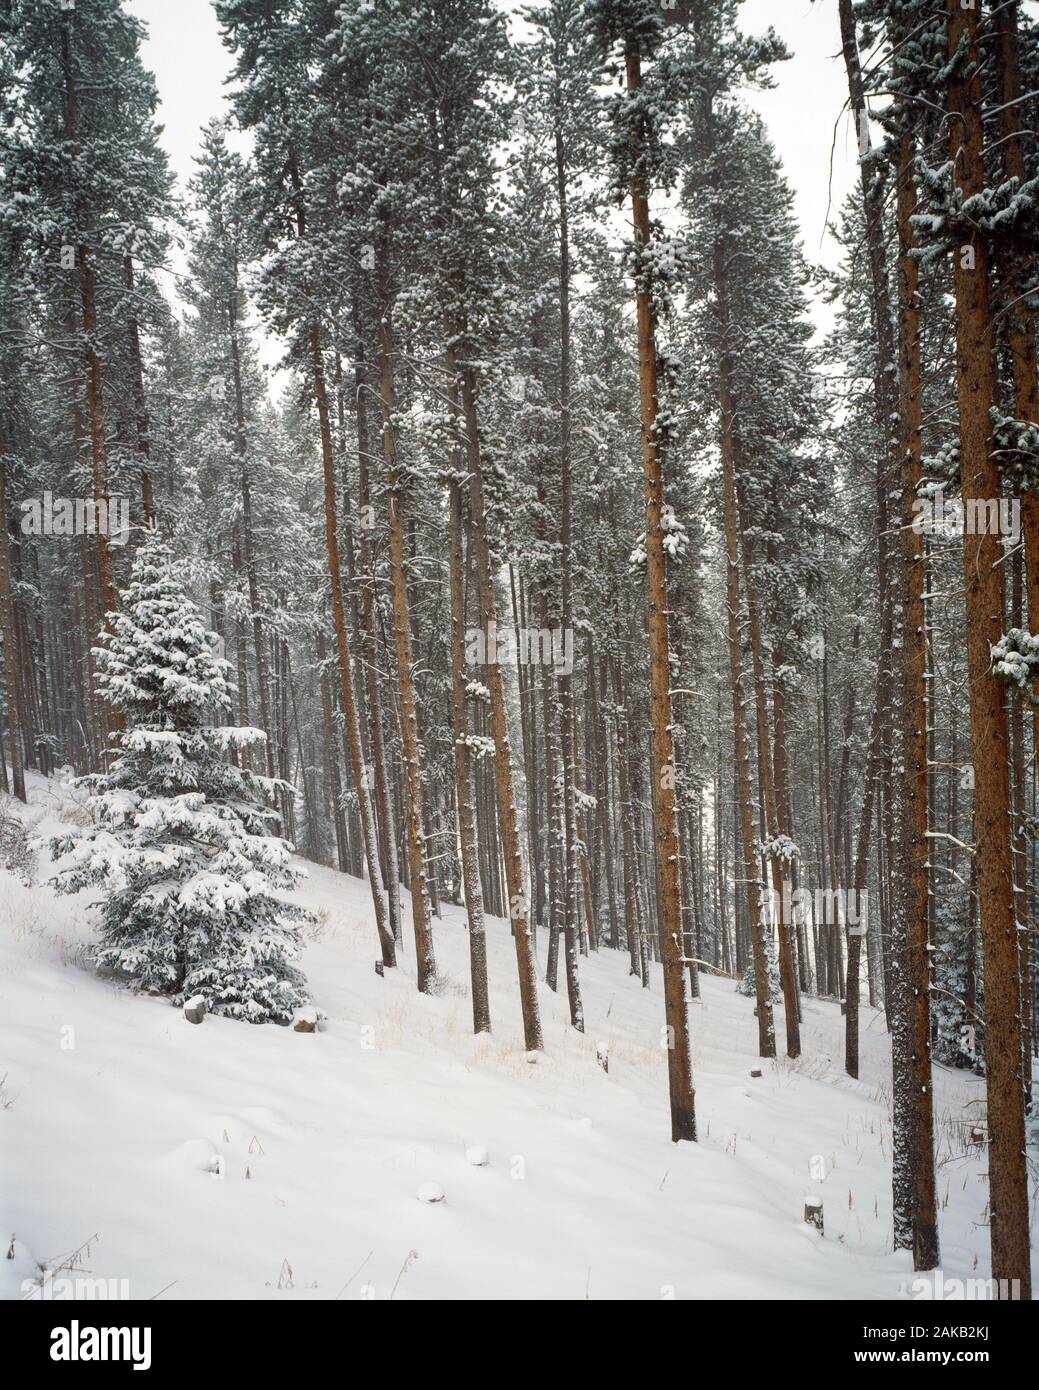 Landscape with view inside of forest on mountainside in winter, Vail, Colorado, USA Stock Photo